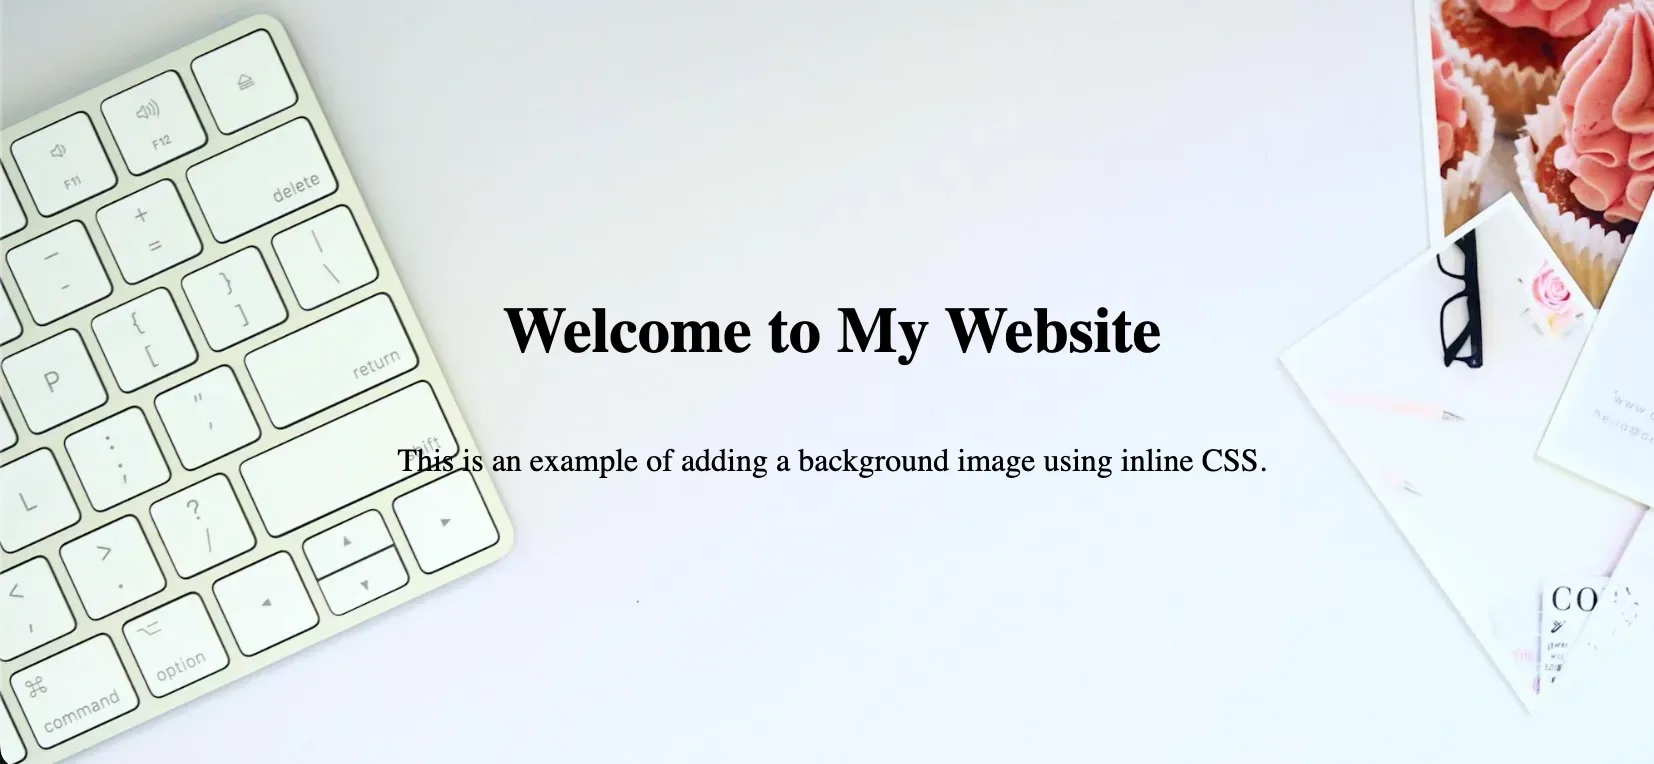 Example of Inline CSS Background Image Code